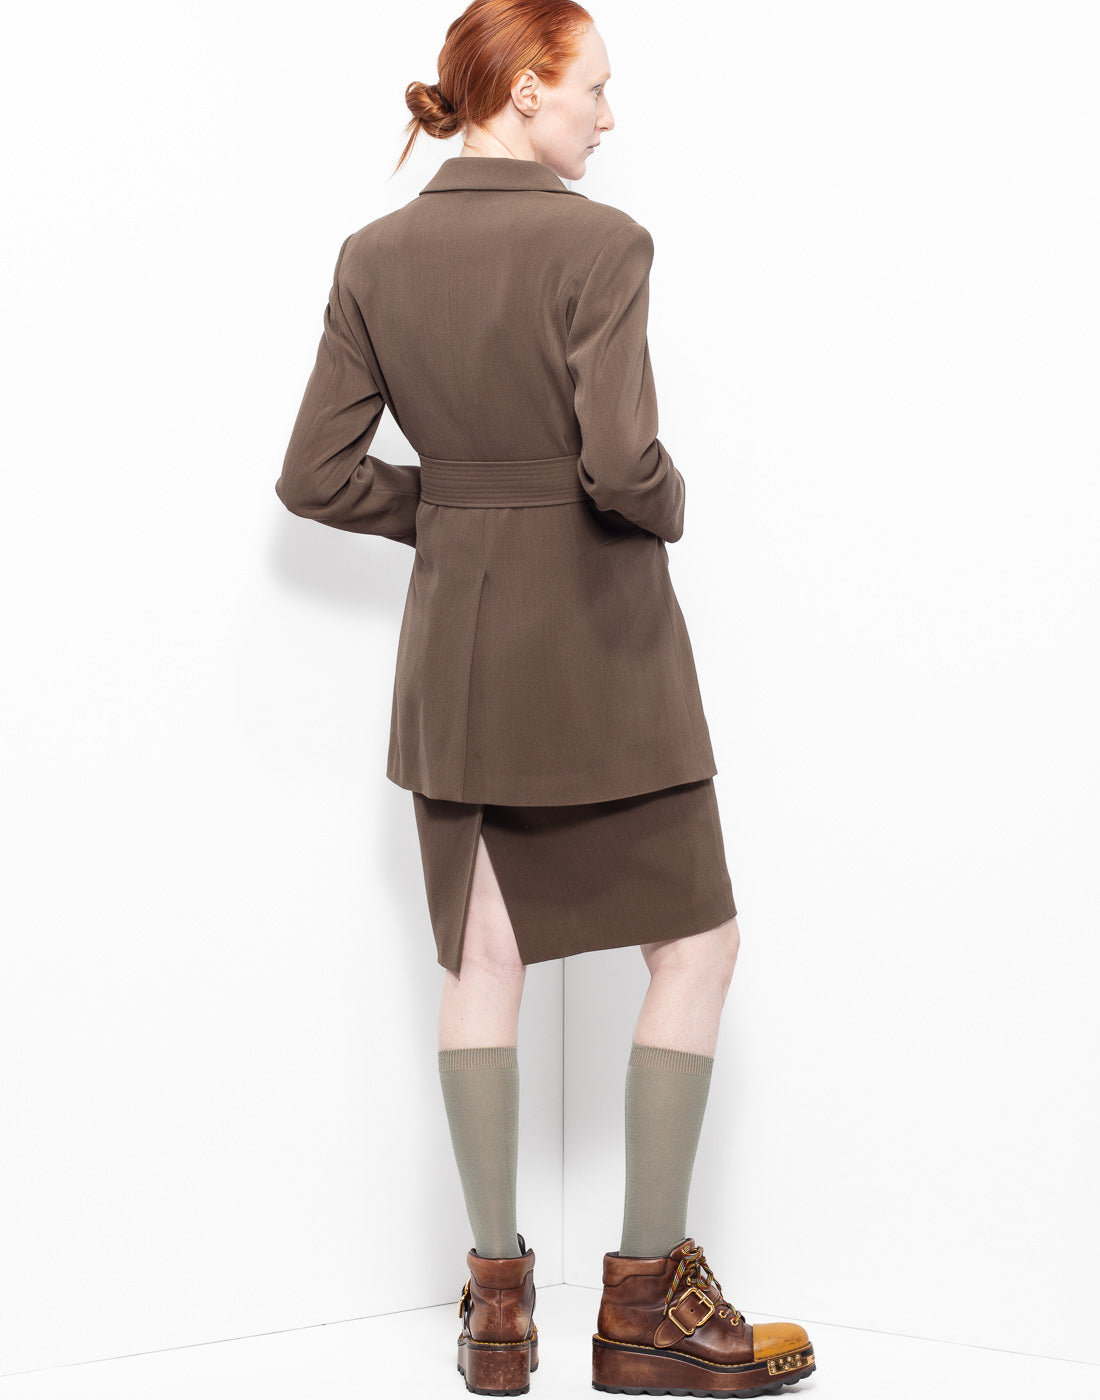 Greenish/brown military skirt suit from Jil Sander archives